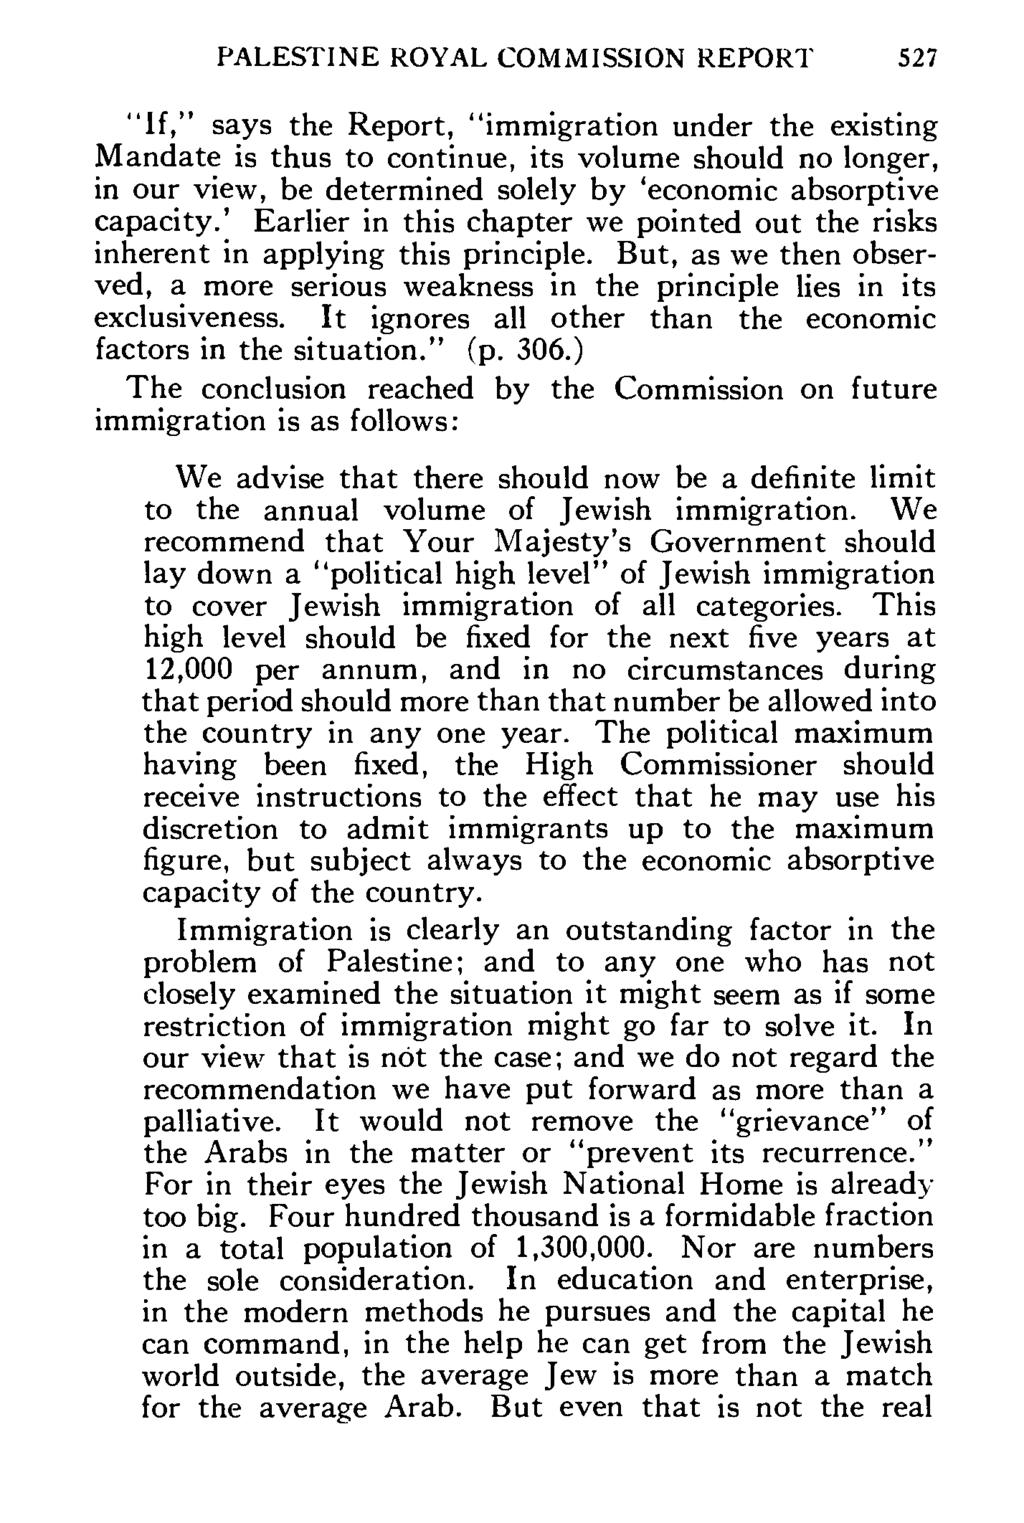 PALESTINE ROYAL COMMISSION REPORT 527 "If," says the Report, "immigration under the existing Mandate is thus to continue, its volume should no longer, in our view, be determined solely by 'economic